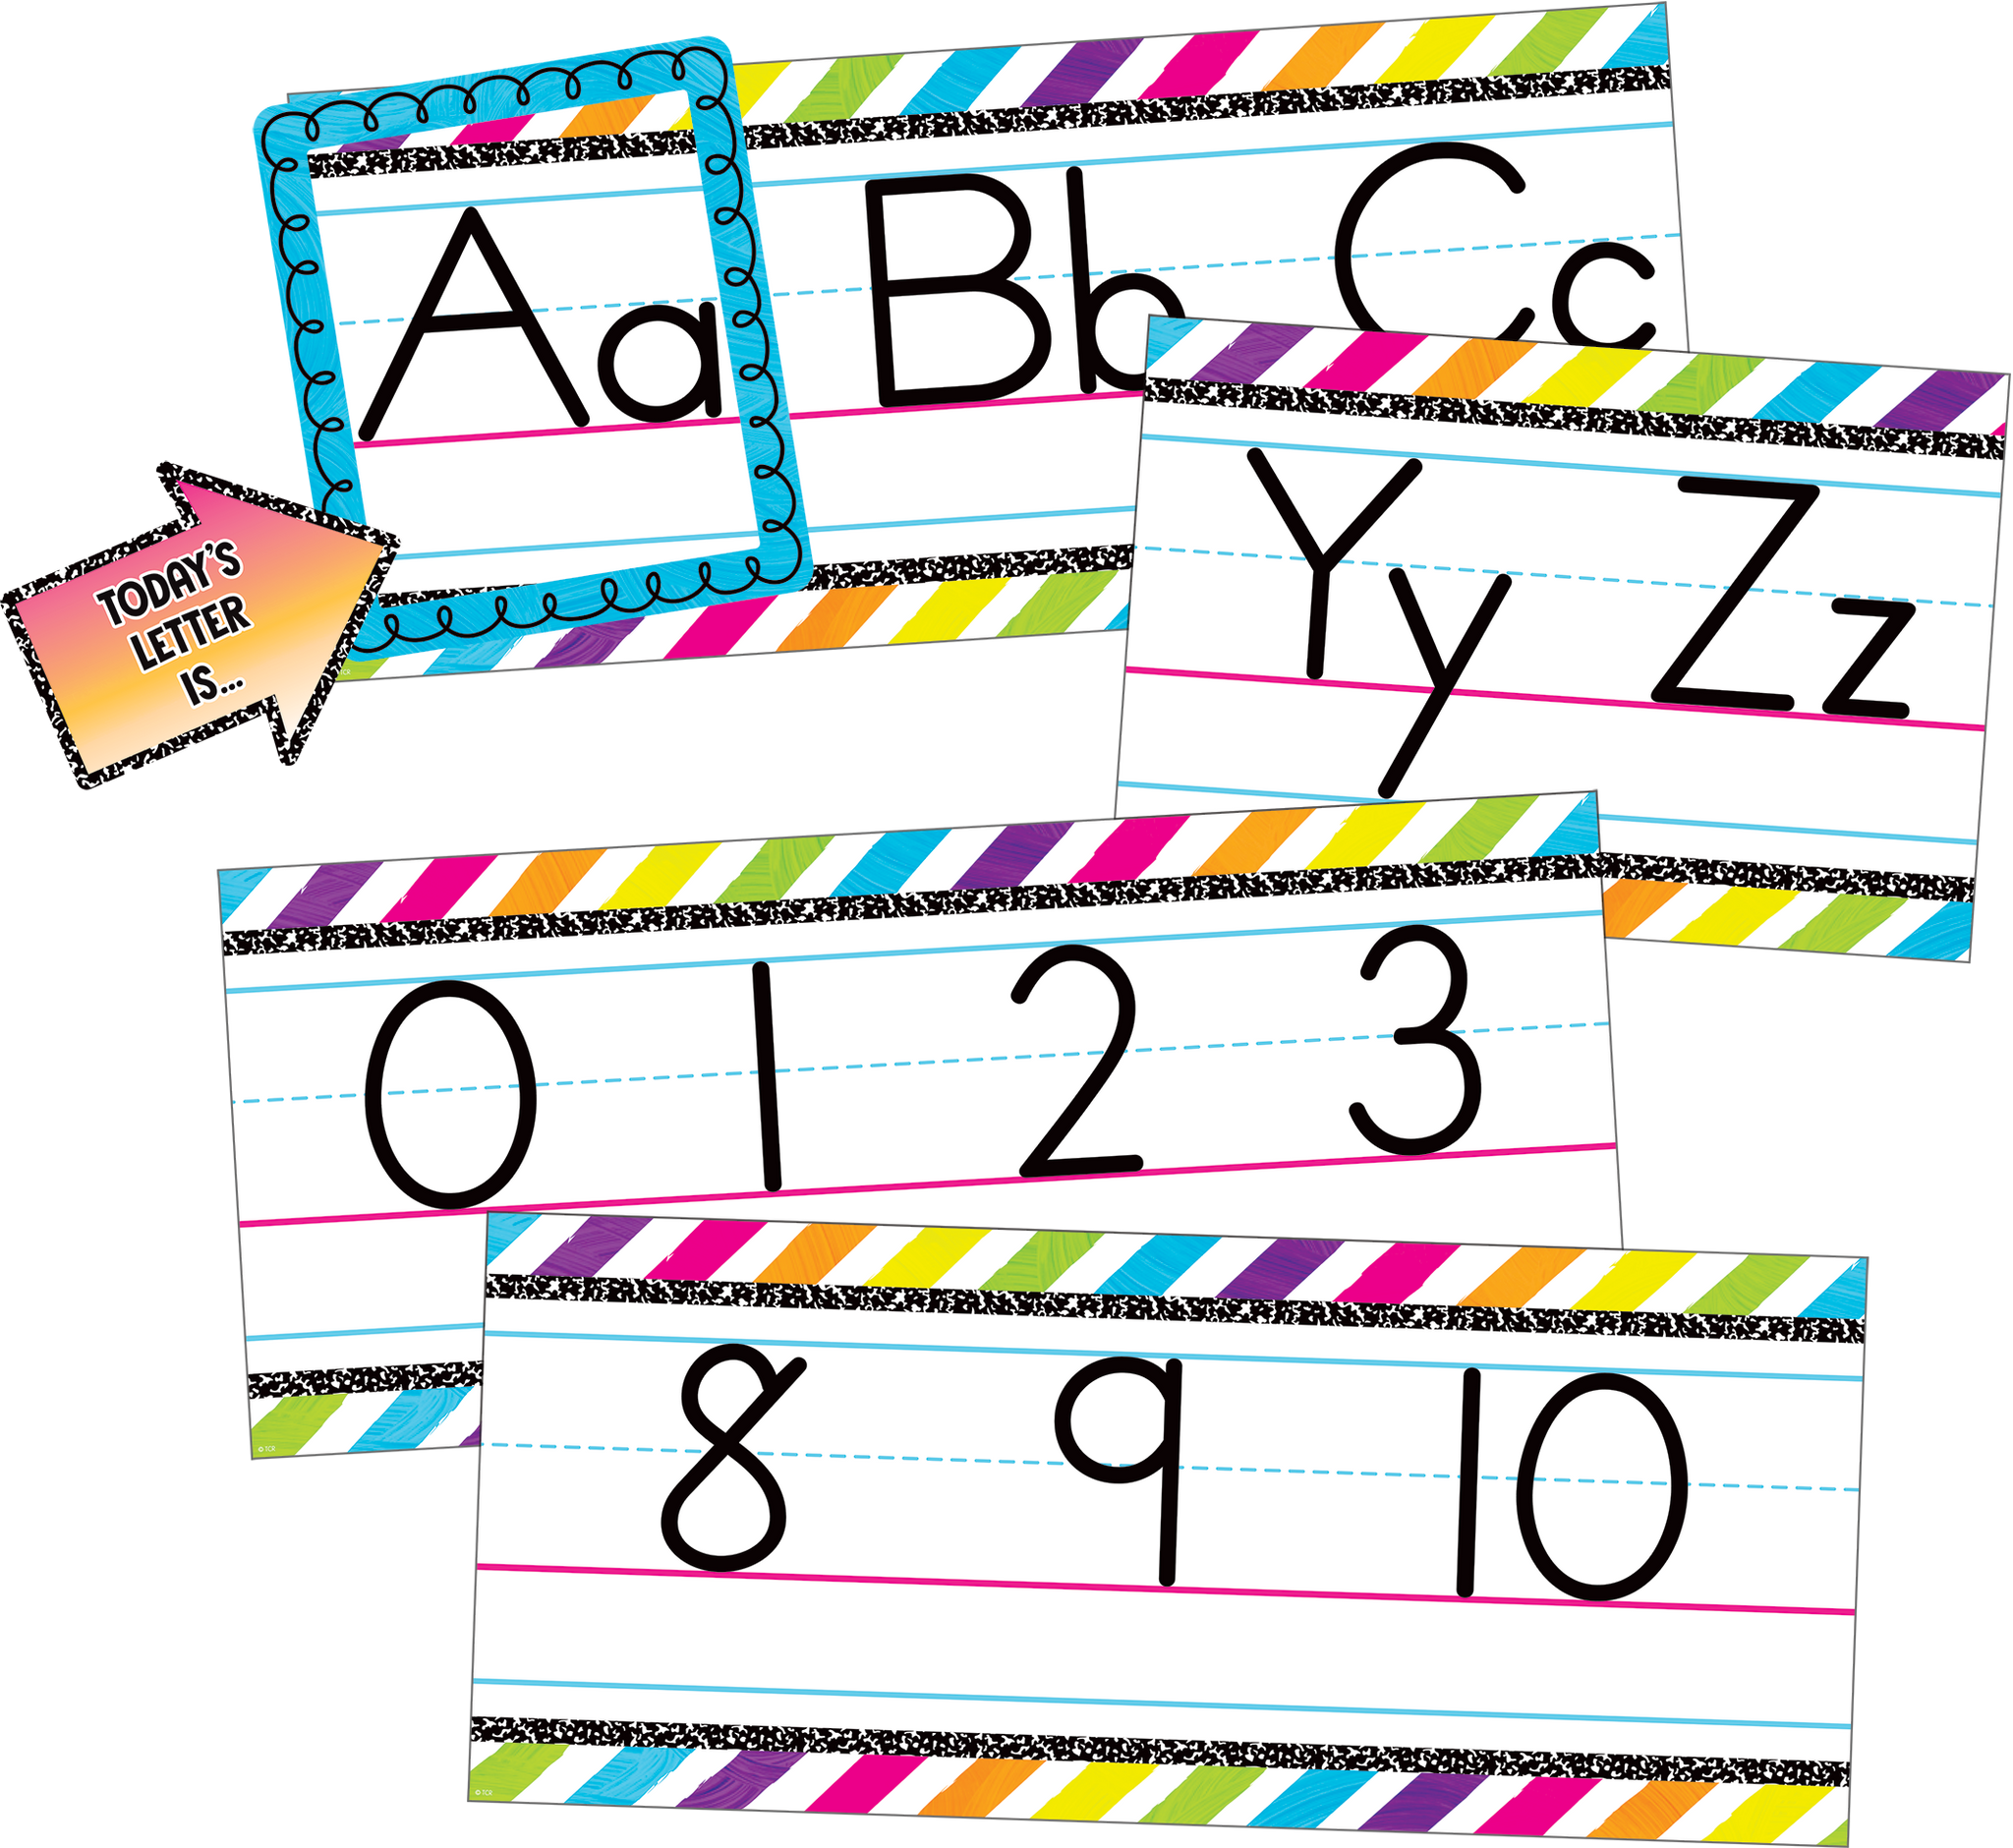 Features: Alphabet line, Number line 0–10, 1 “Today’s Letter is . . .” arrow accent, 1 frame accent to highlight a letter, Bulletin board guide with set-up and activity suggestions, Shiny protective coating for durability